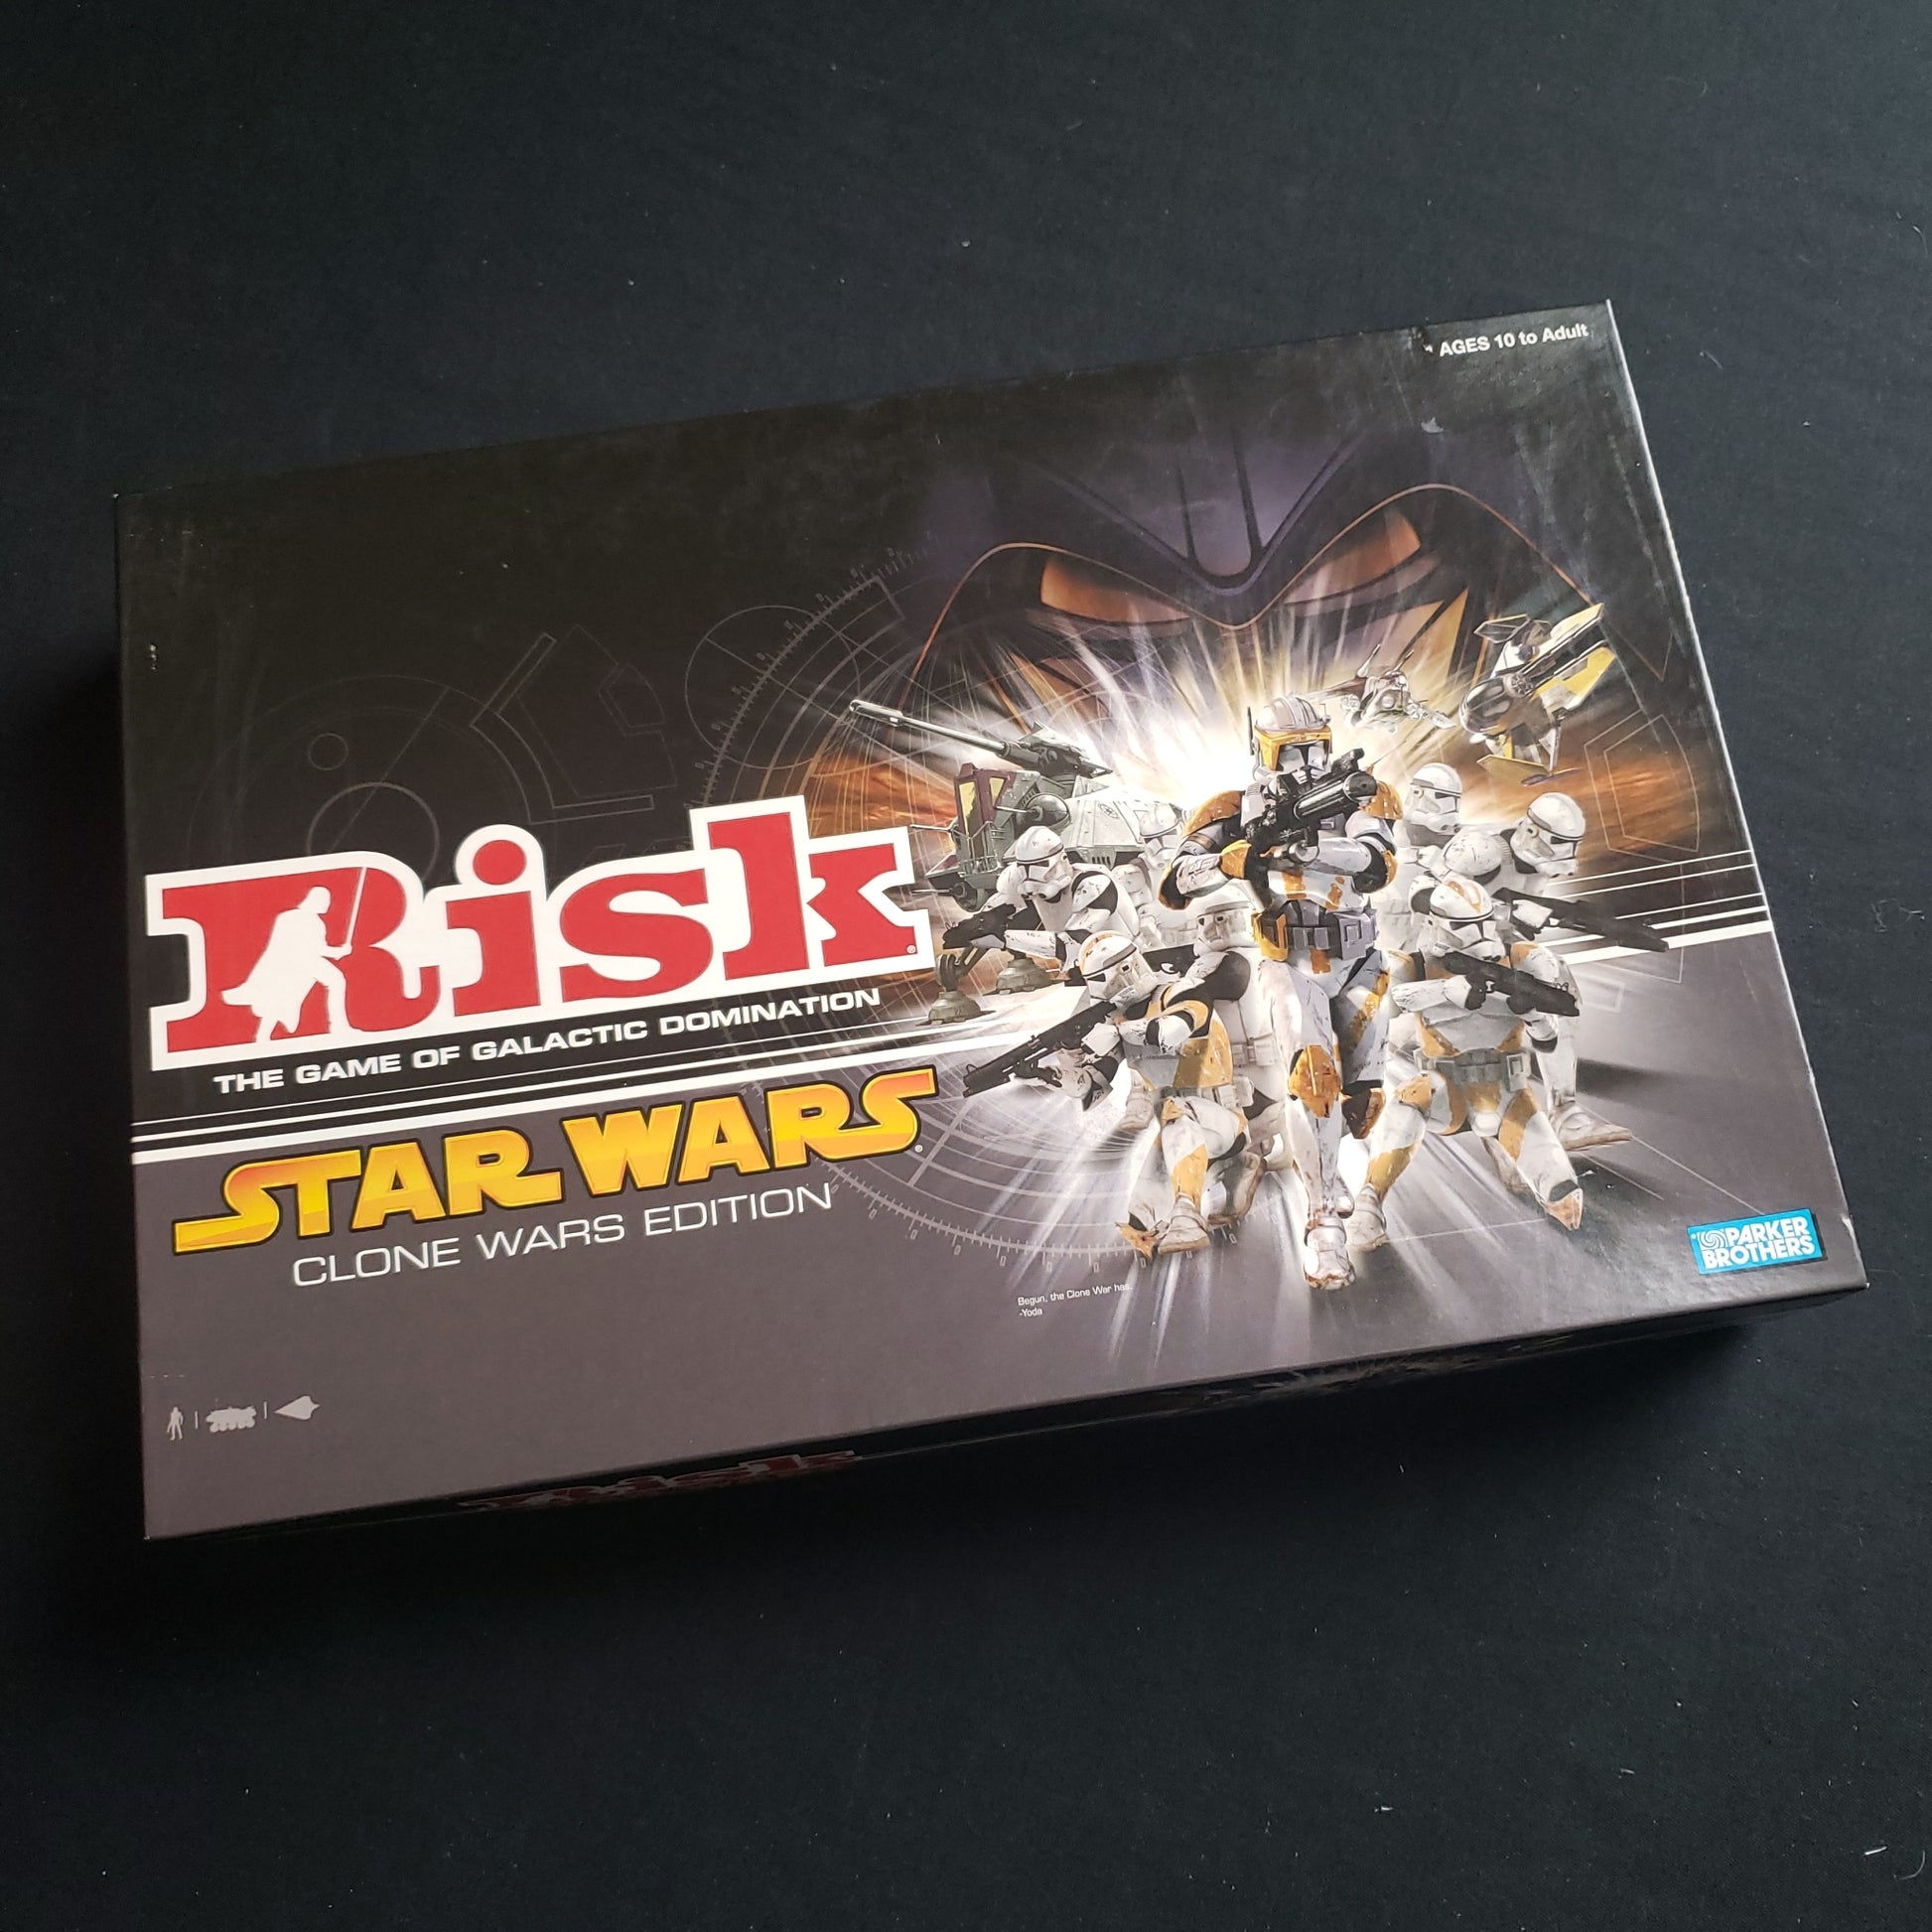 Image shows the front cover of the box of the Risk: Star Wars - Clone Wars Edition board game